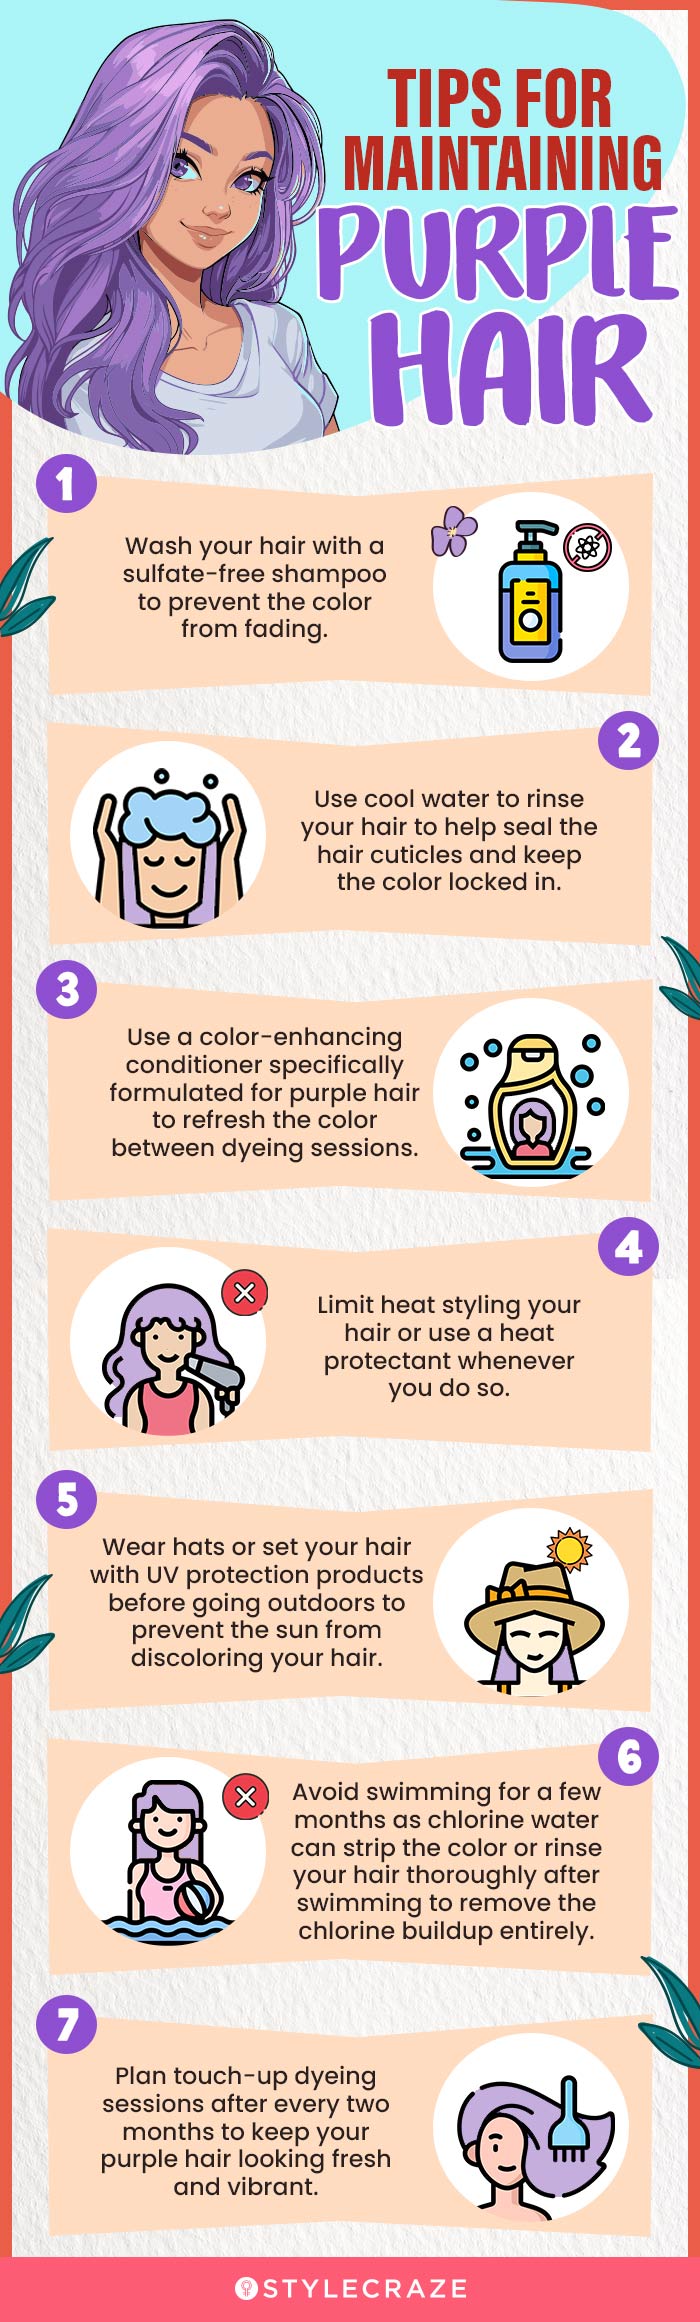 Tips For Maintaining Purple Hair (infographic)